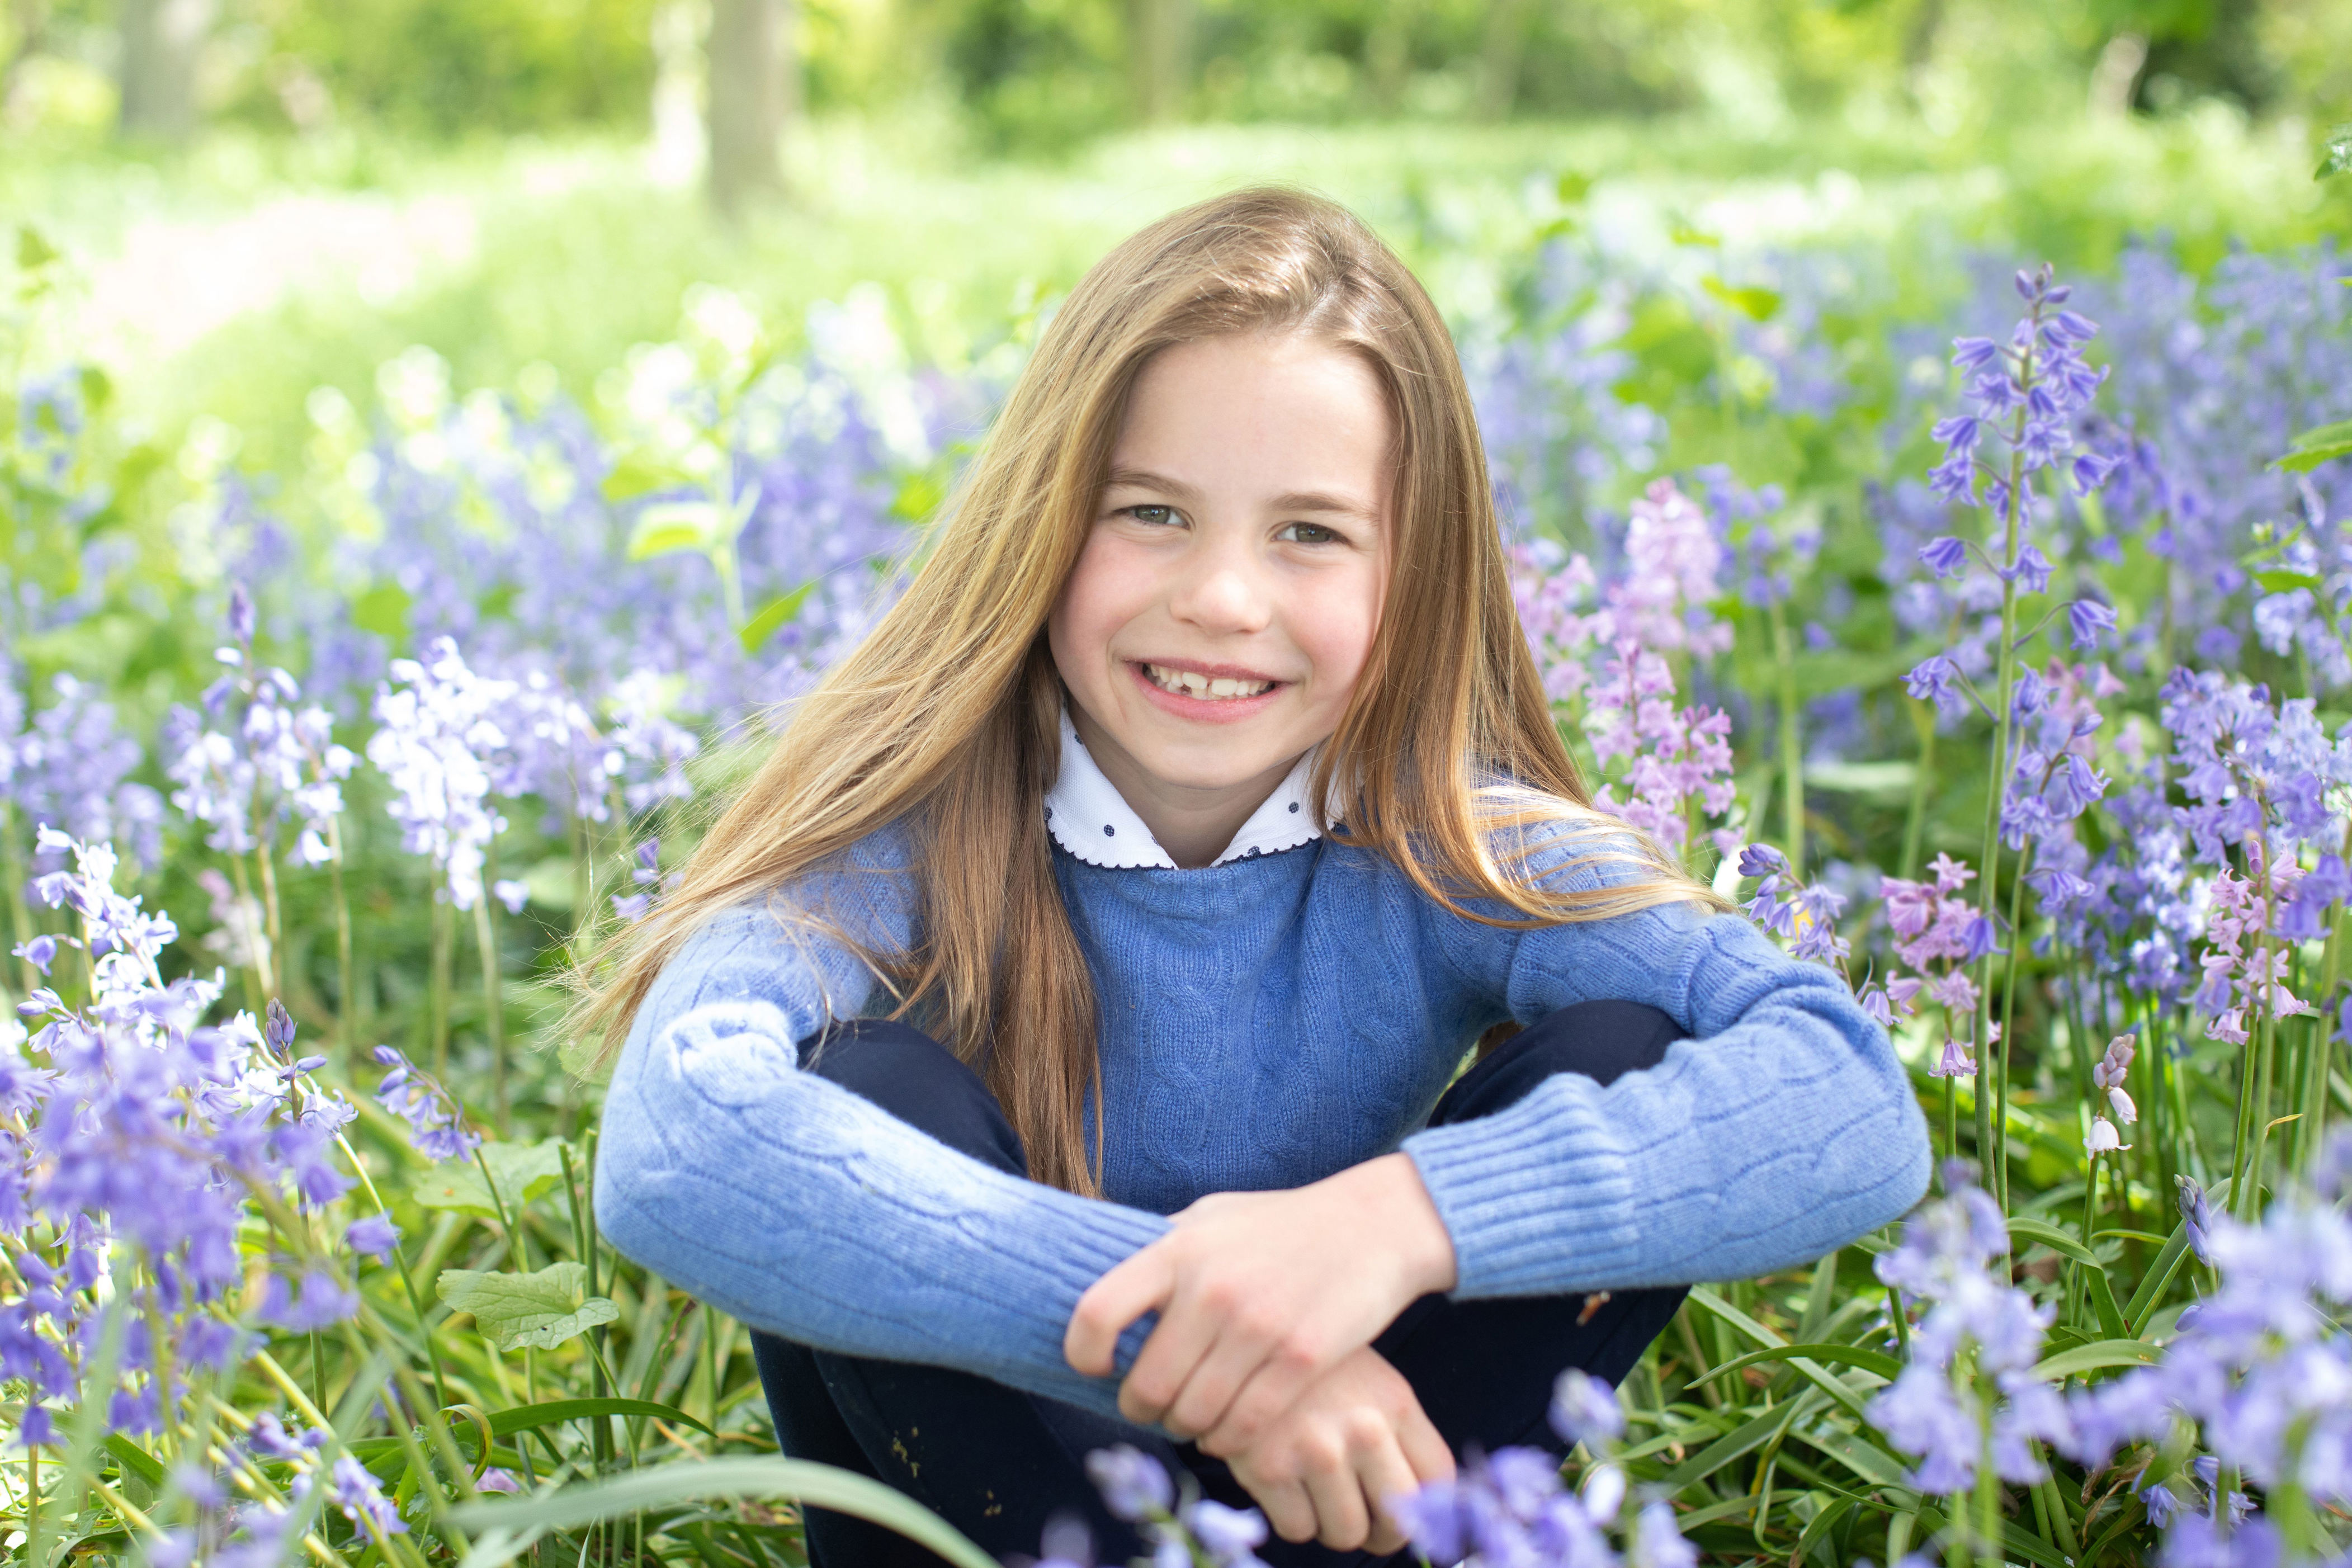 <p>Princess Charlotte posed in a field of bluebells in a portrait taken by her mother, <a href="https://www.wonderwall.com/celebrity/profiles/overview/duchess-kate-1356.article">Duchess Kate</a>, near their country home, Anmer Hall, in Norfolk, England, the weekend before her 7th birthday -- May 2, 2022.</p>